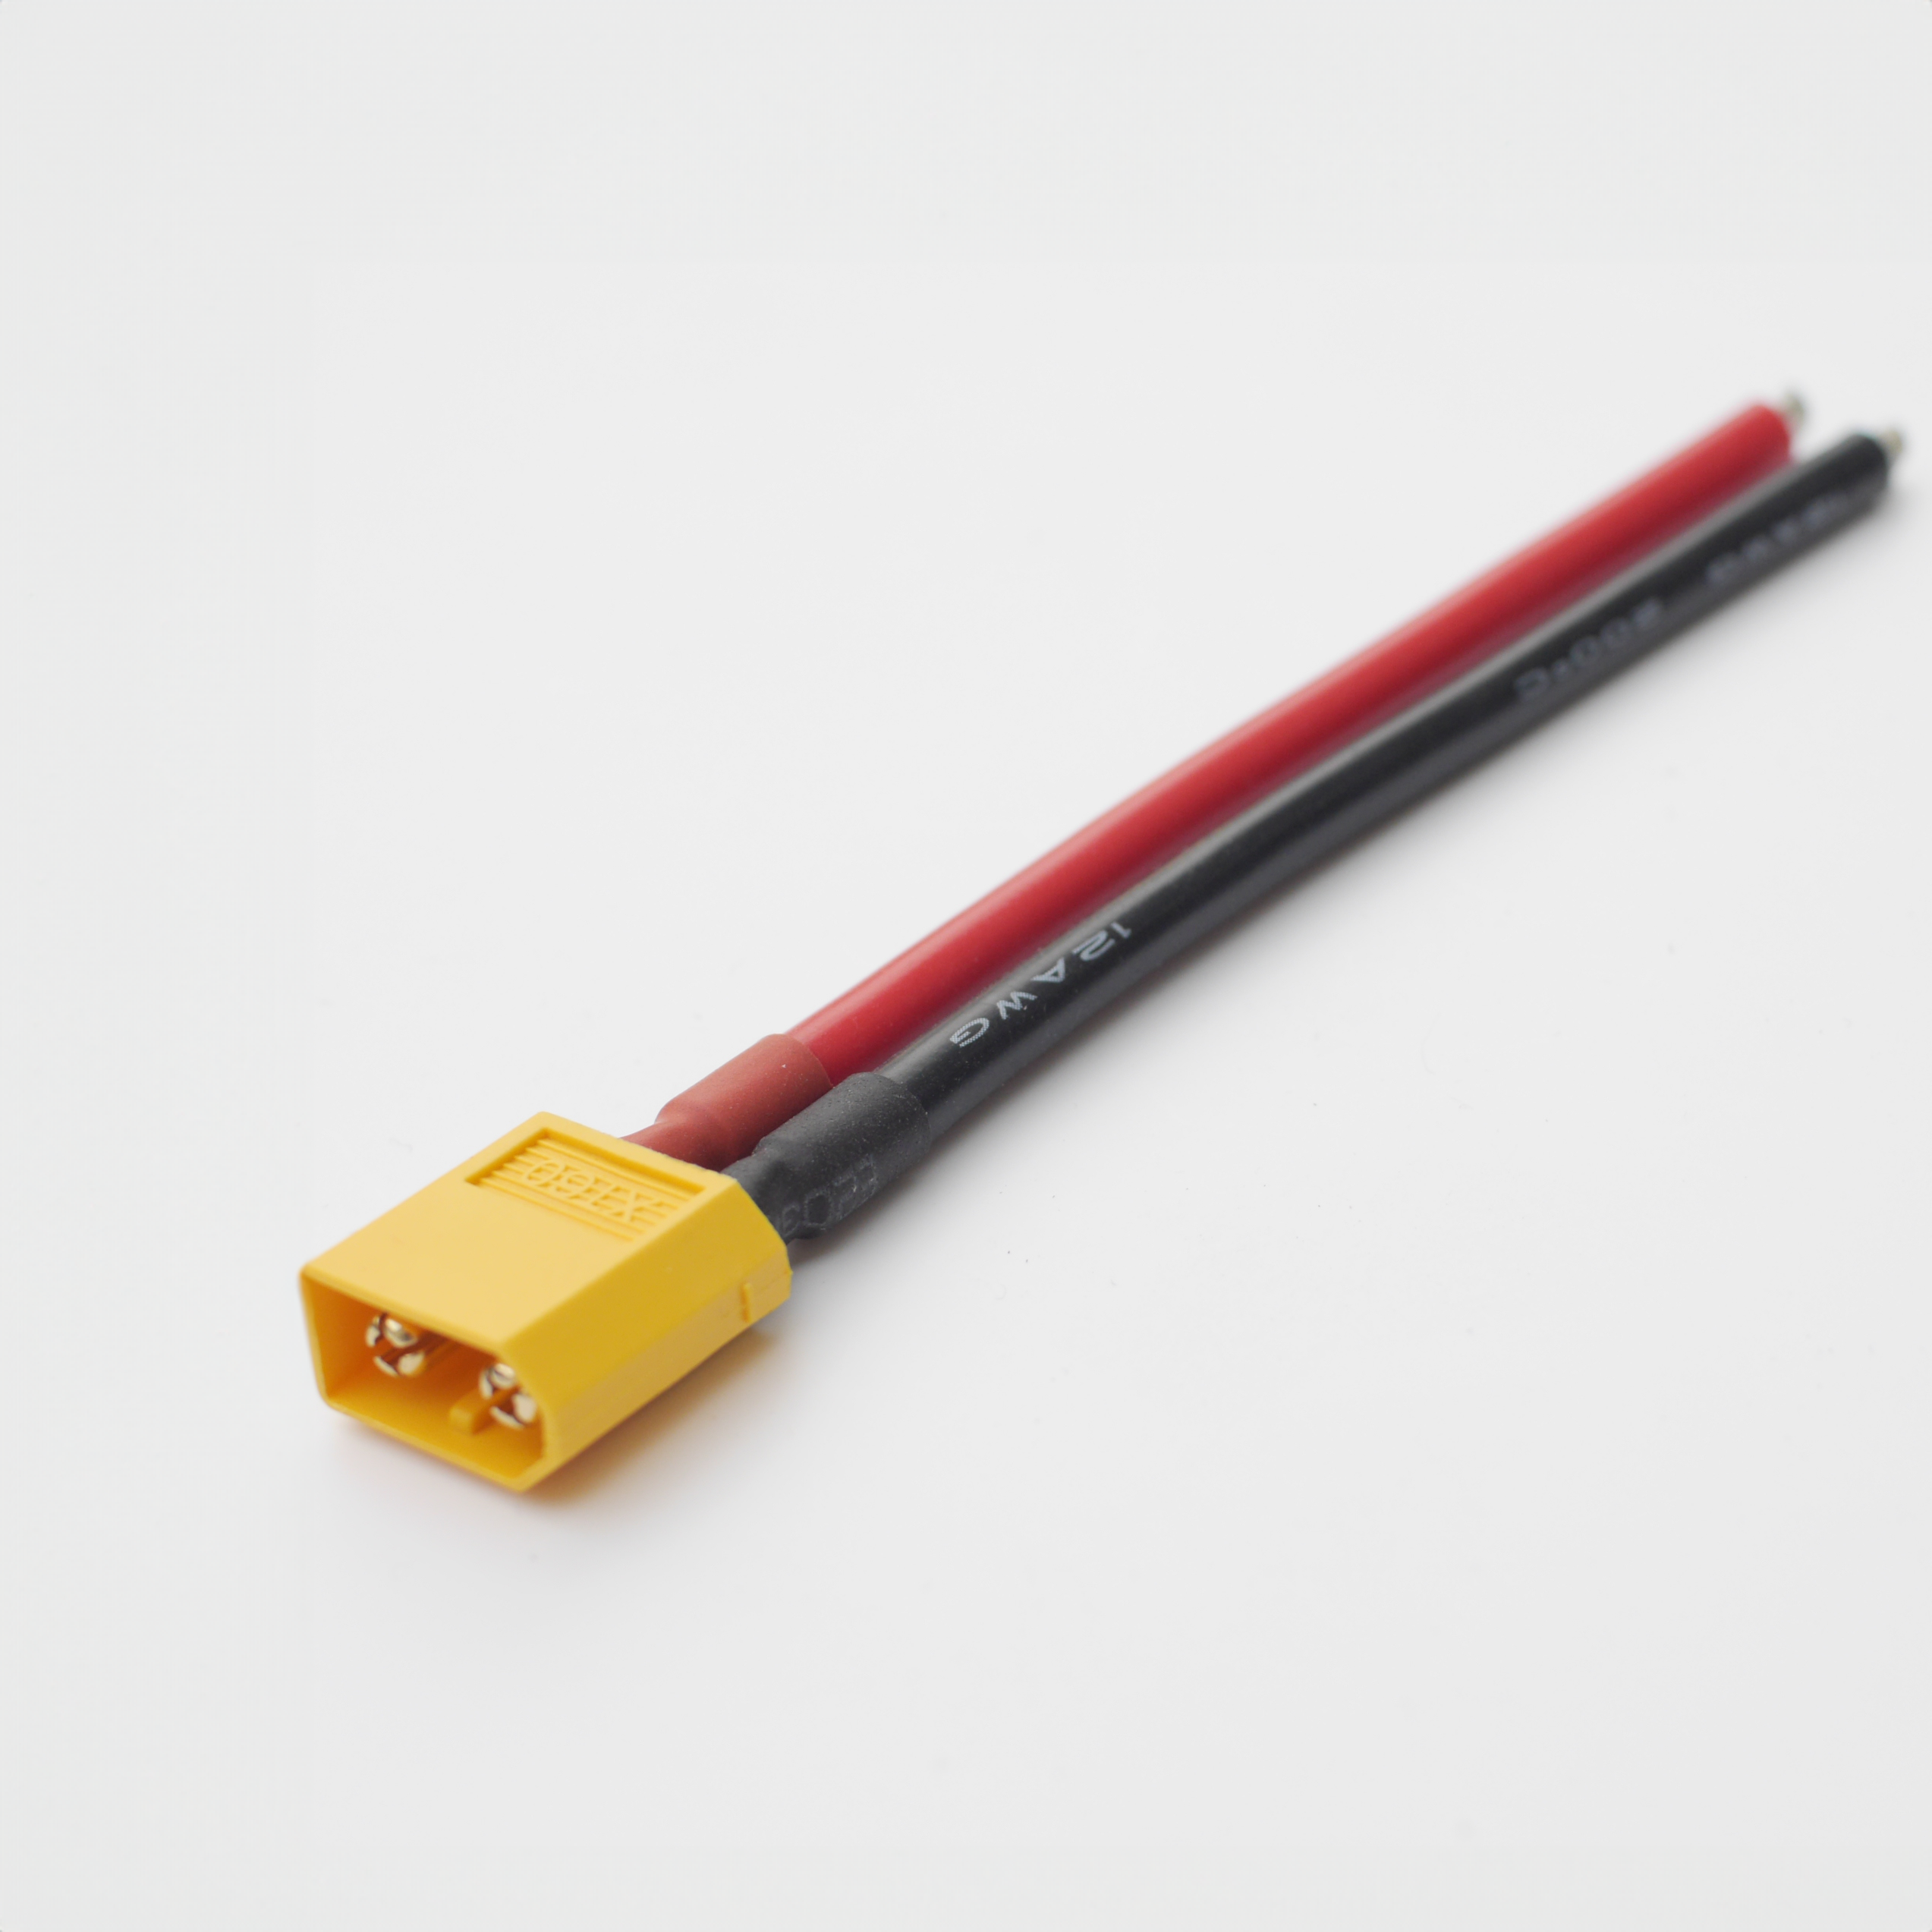 XT60 battery cable